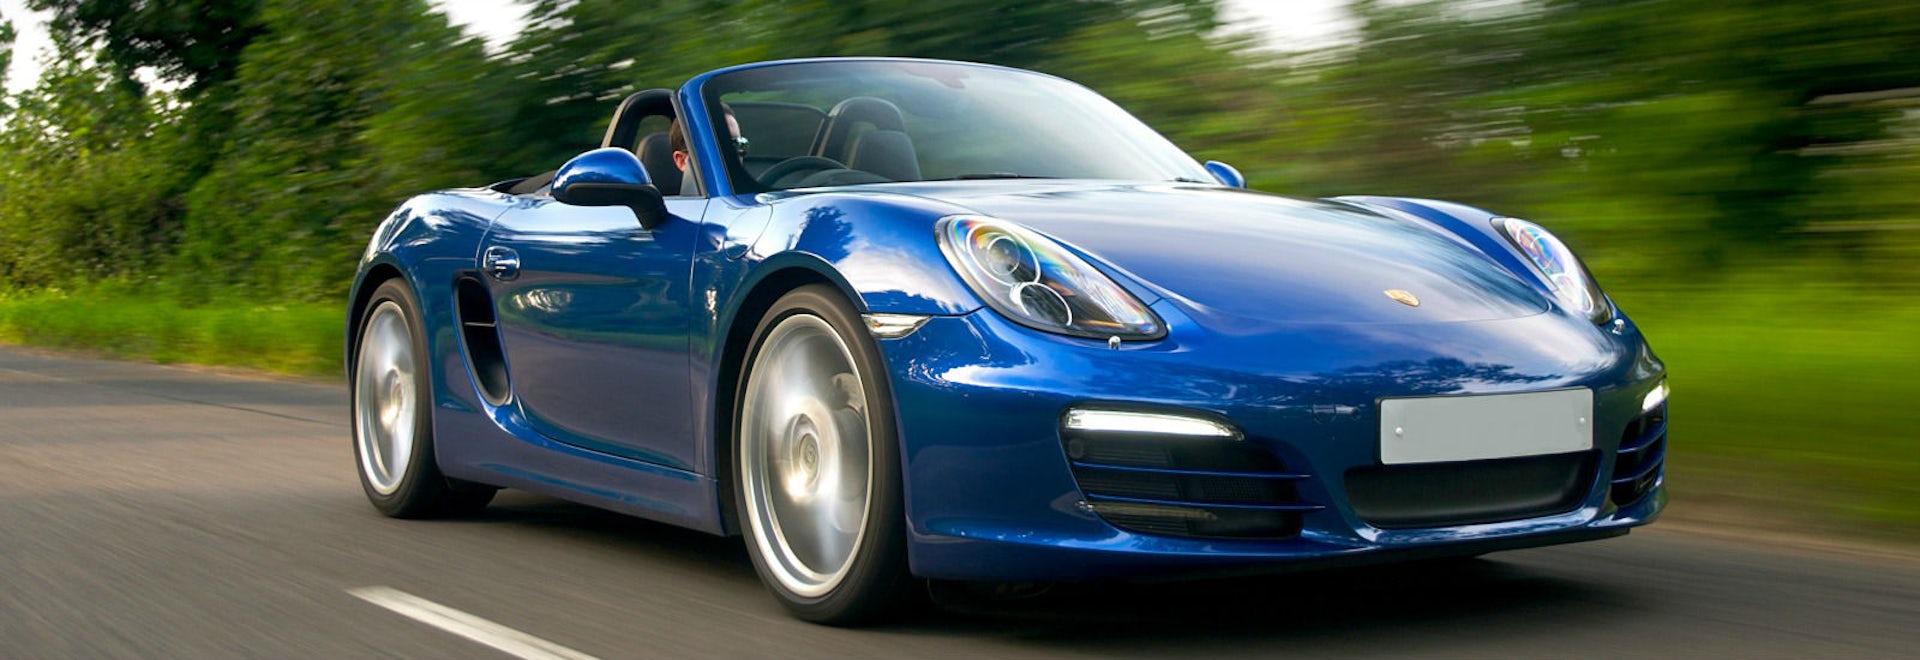 The 10 best used sports cars carwow